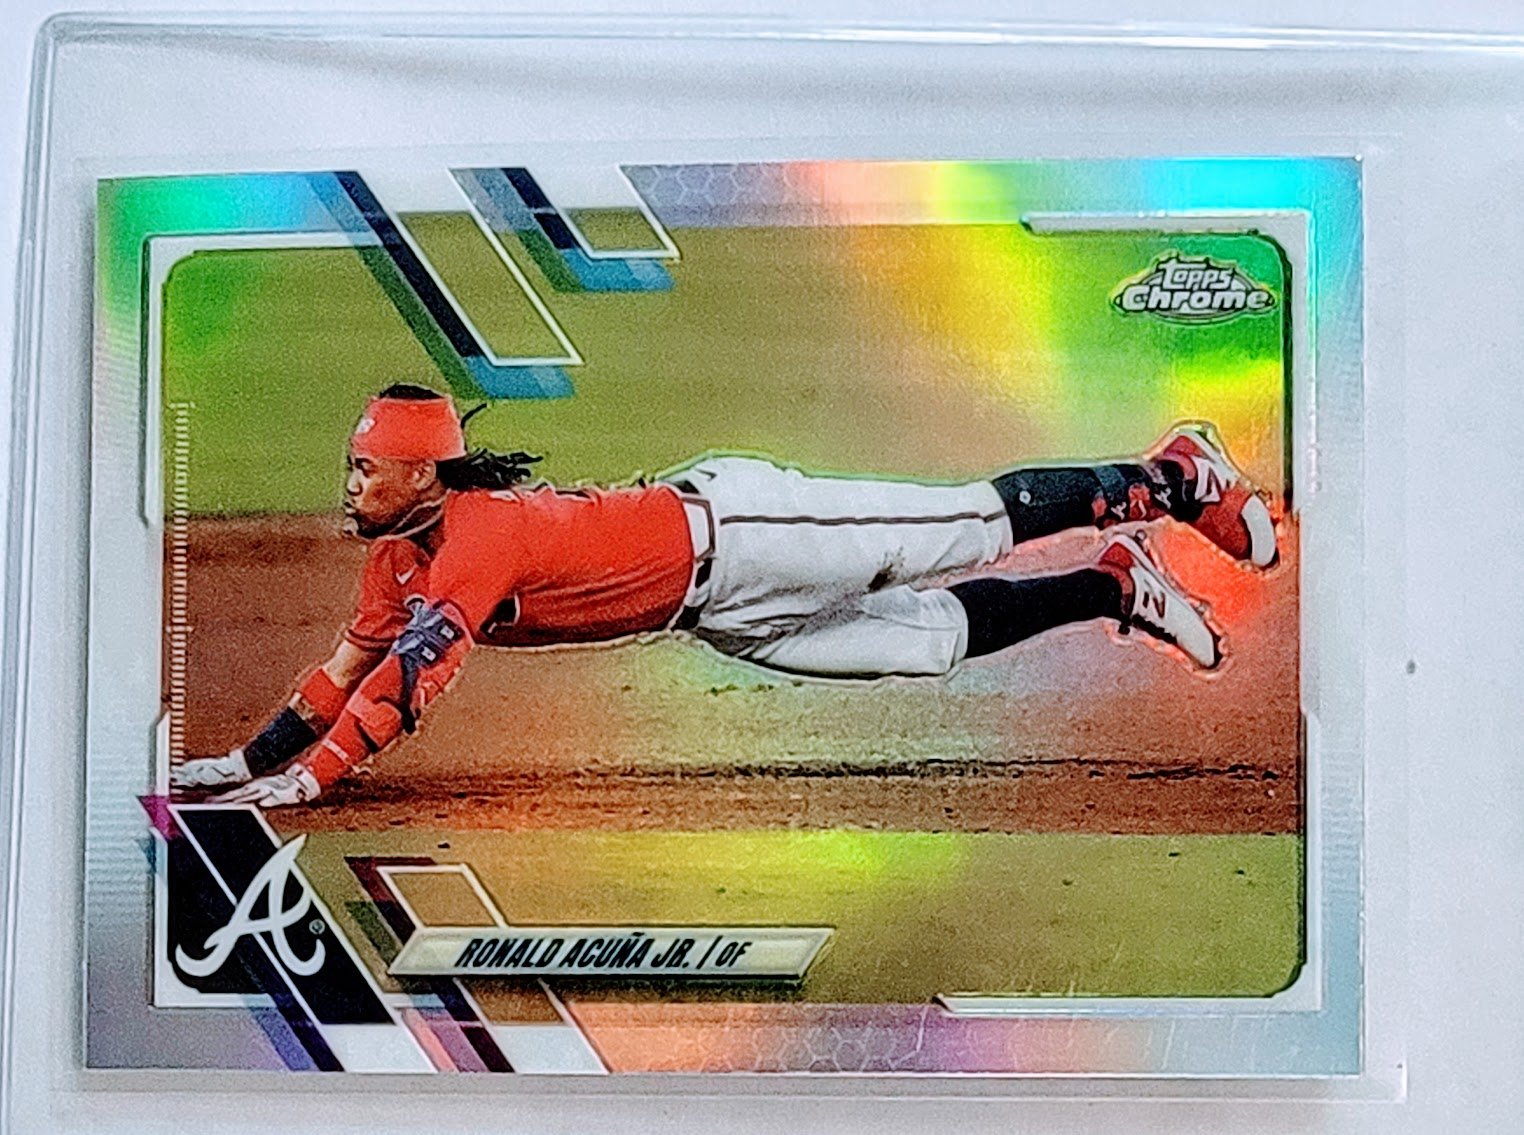 2021 Topps Chrome Ronald Acuna Jr Refractor Baseball Trading Card TPTV simple Xclusive Collectibles   